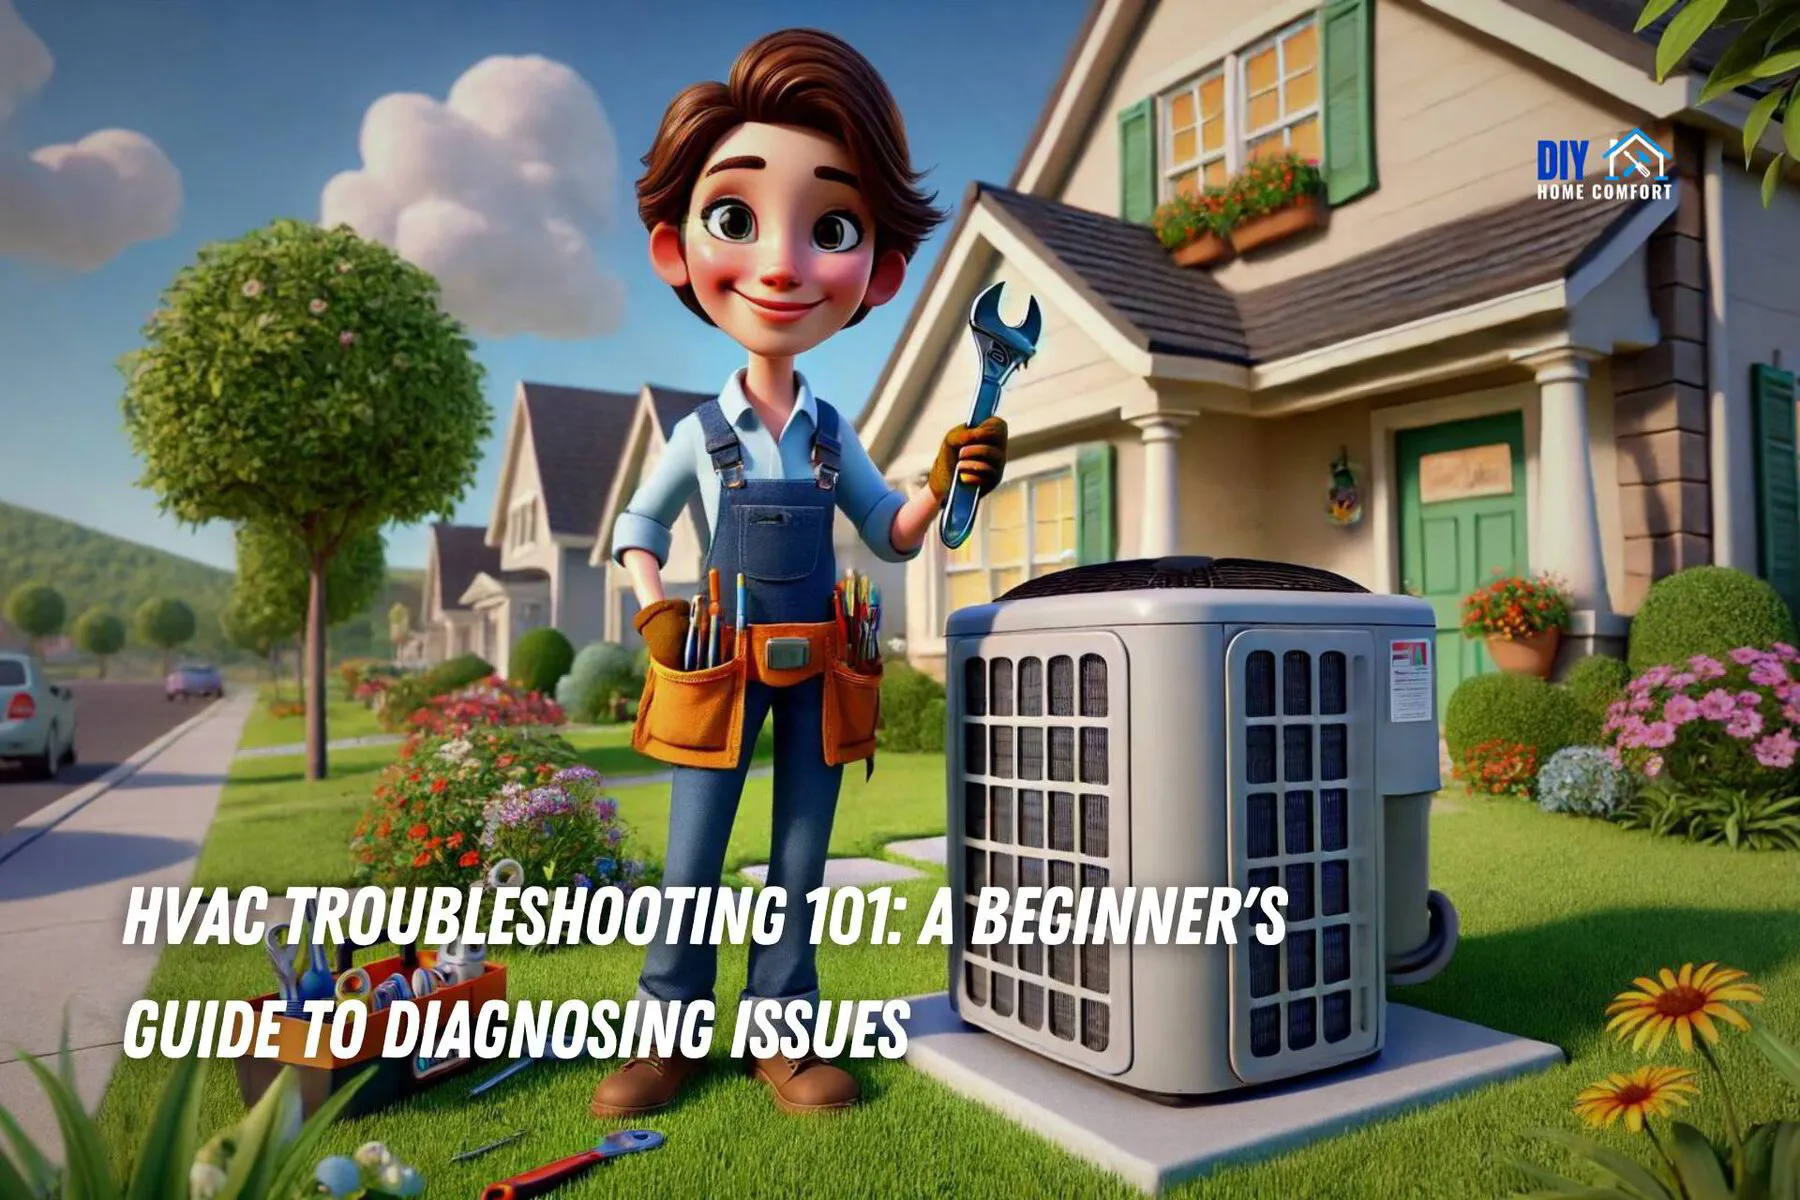 HVAC Troubleshooting 101: A Beginner's Guide to Diagnosing Issues | DIY Home Comfort